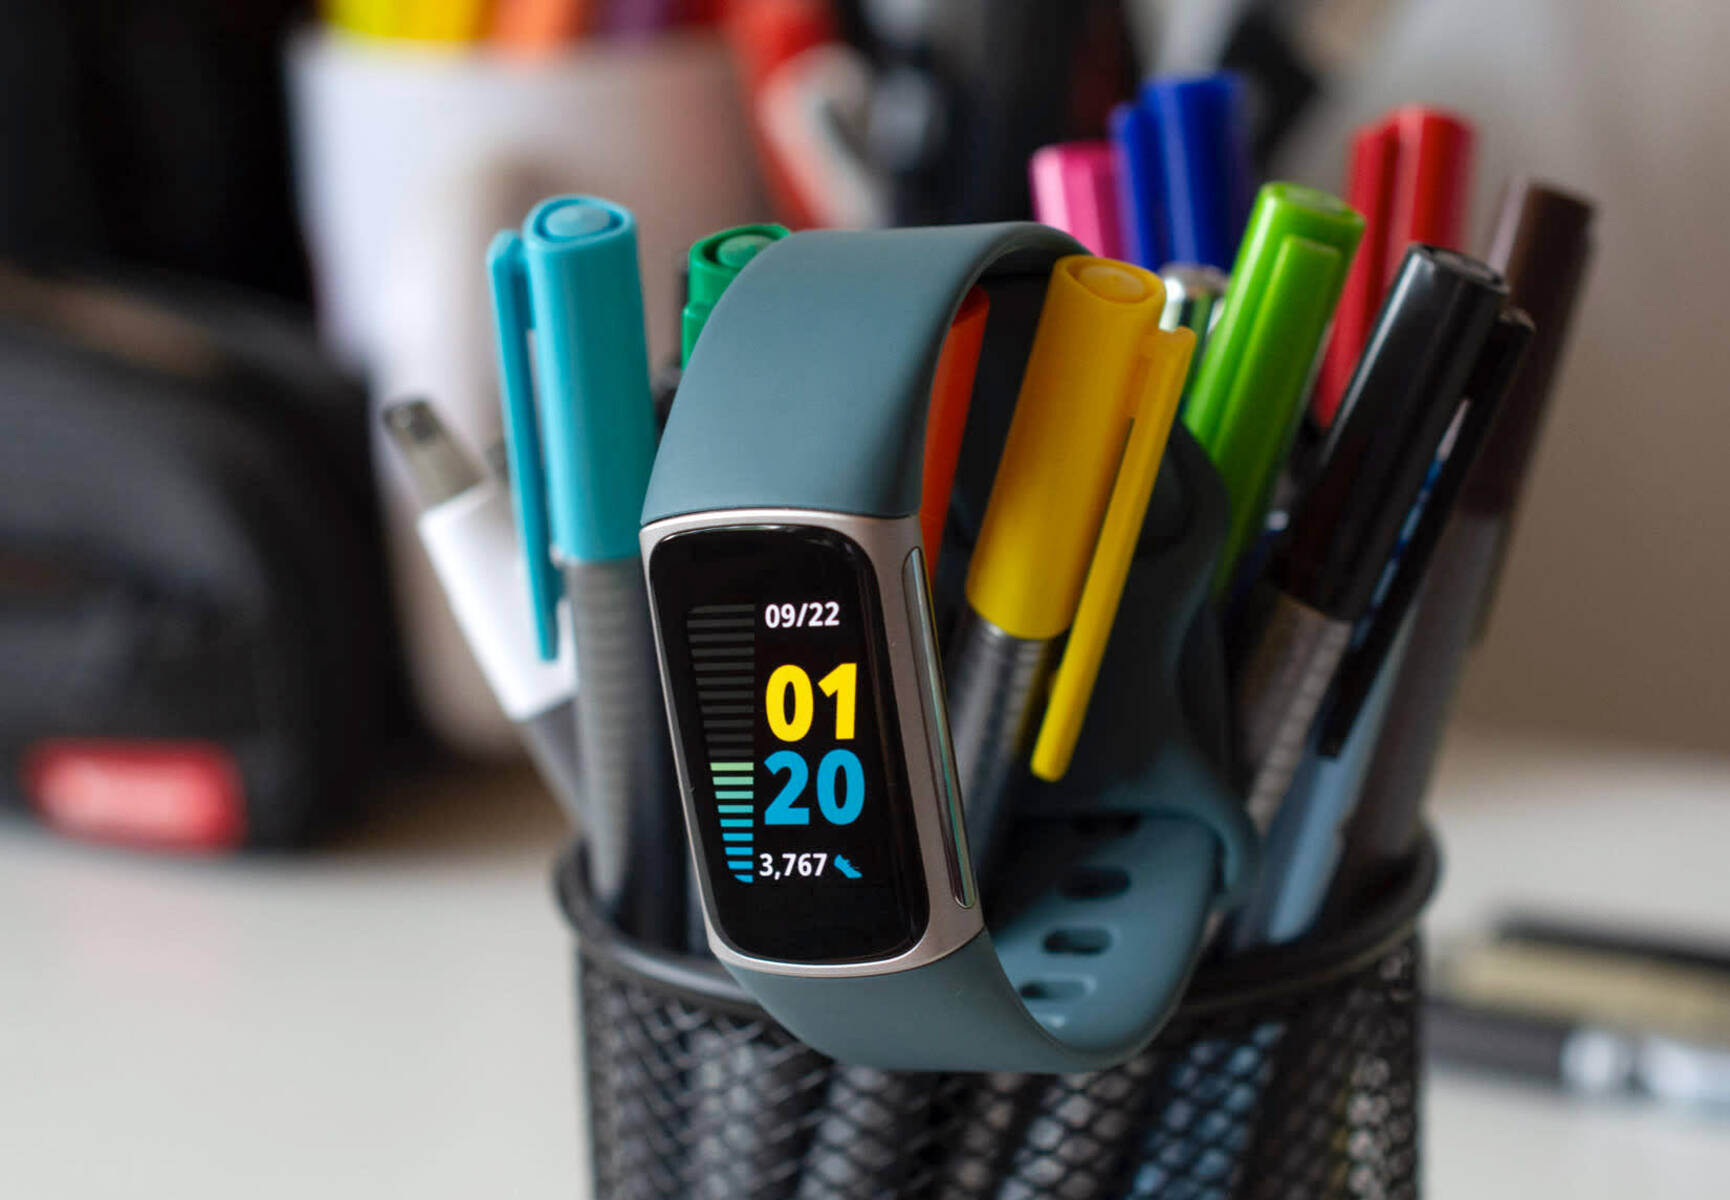 Charge 5 Wake-Up: A Guide To Waking Up Your Fitbit Charge 5